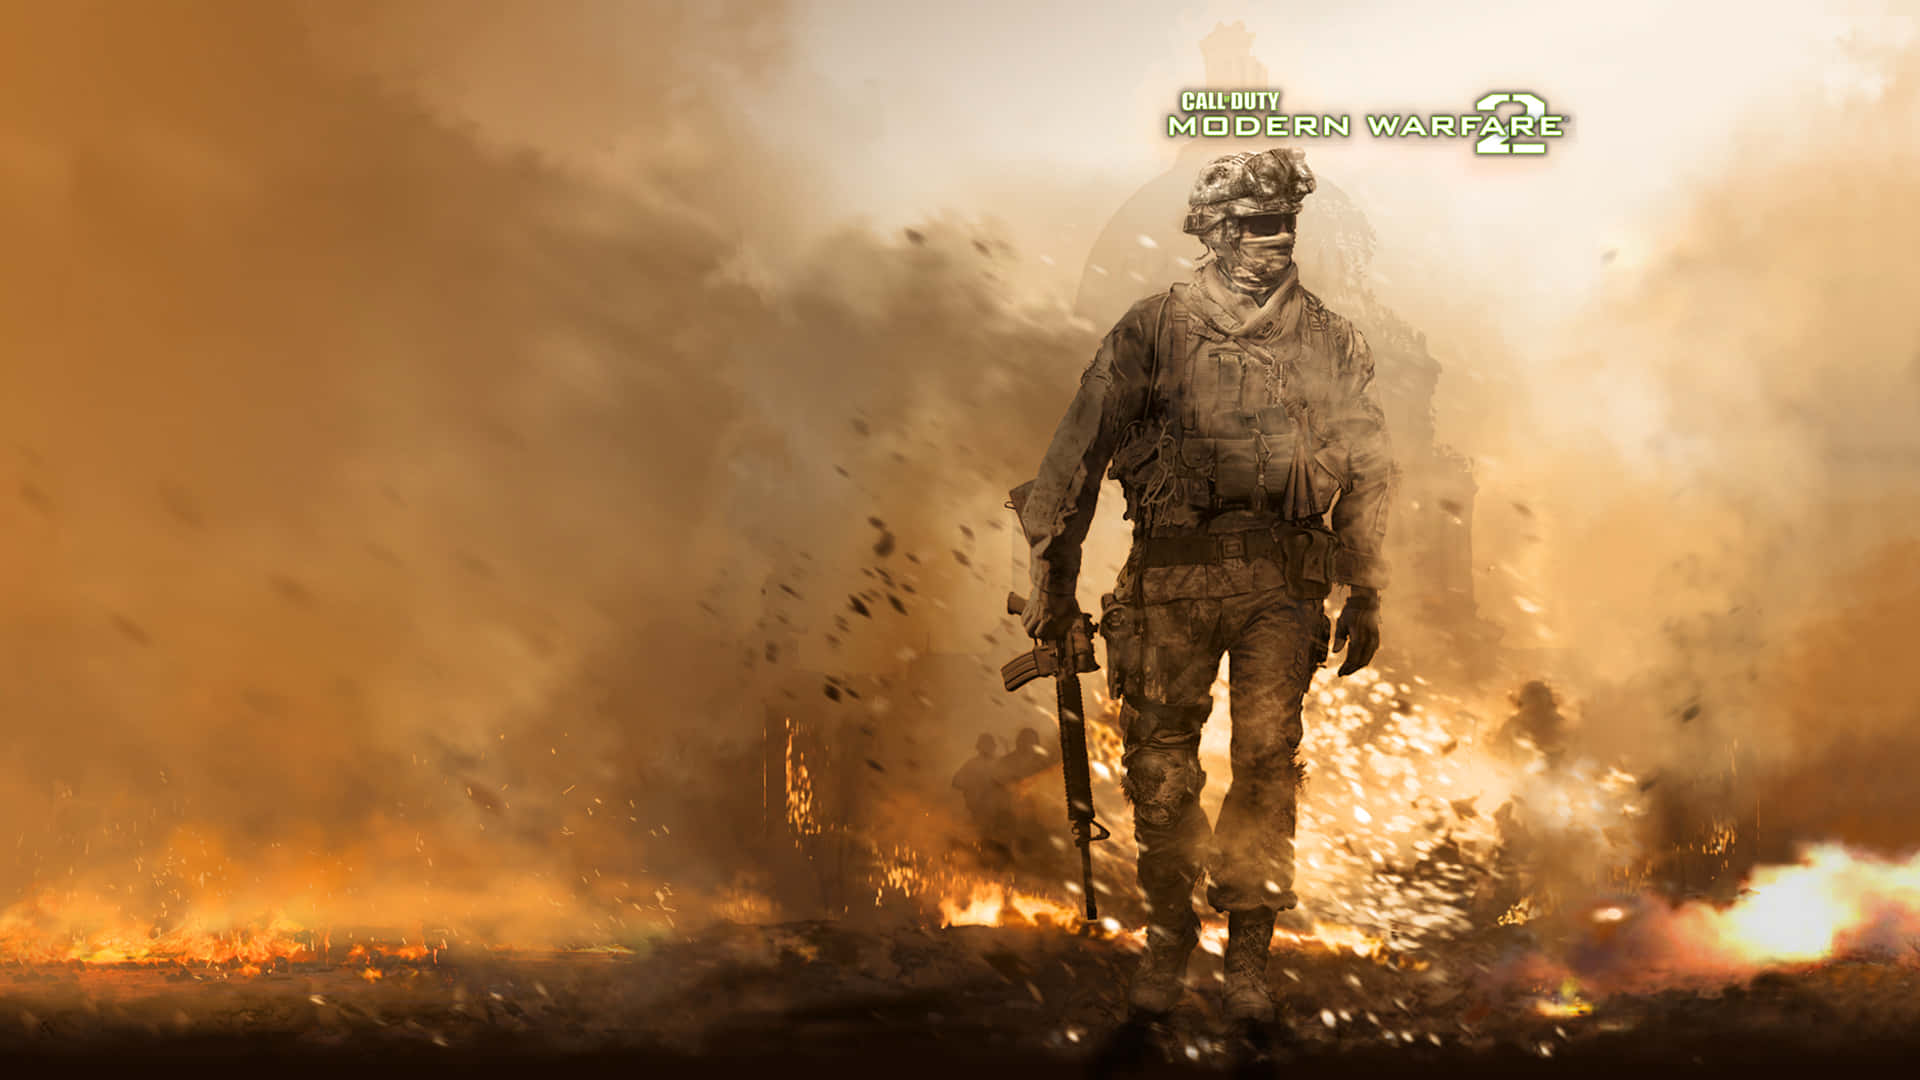 Embark on an epic mission with Modern Warfare